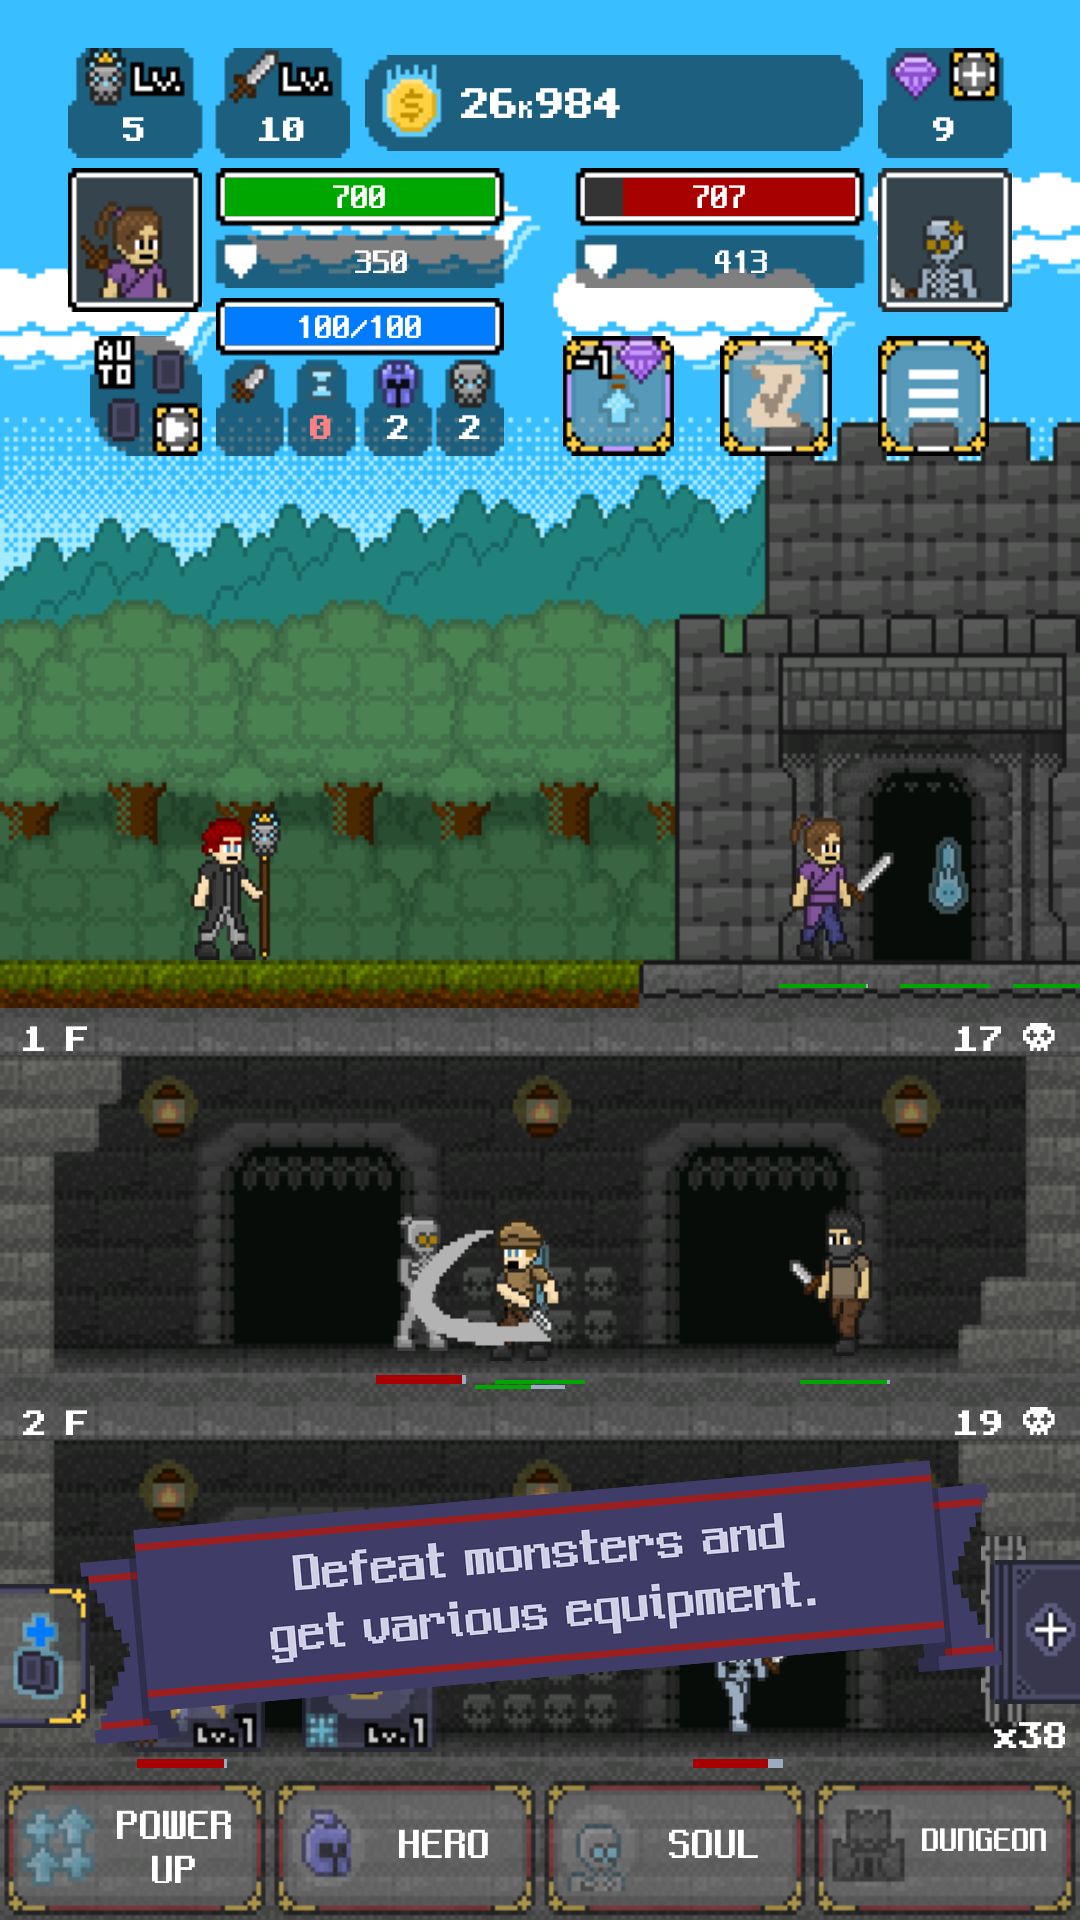 Soul Sword : Grow Sword Master for Android